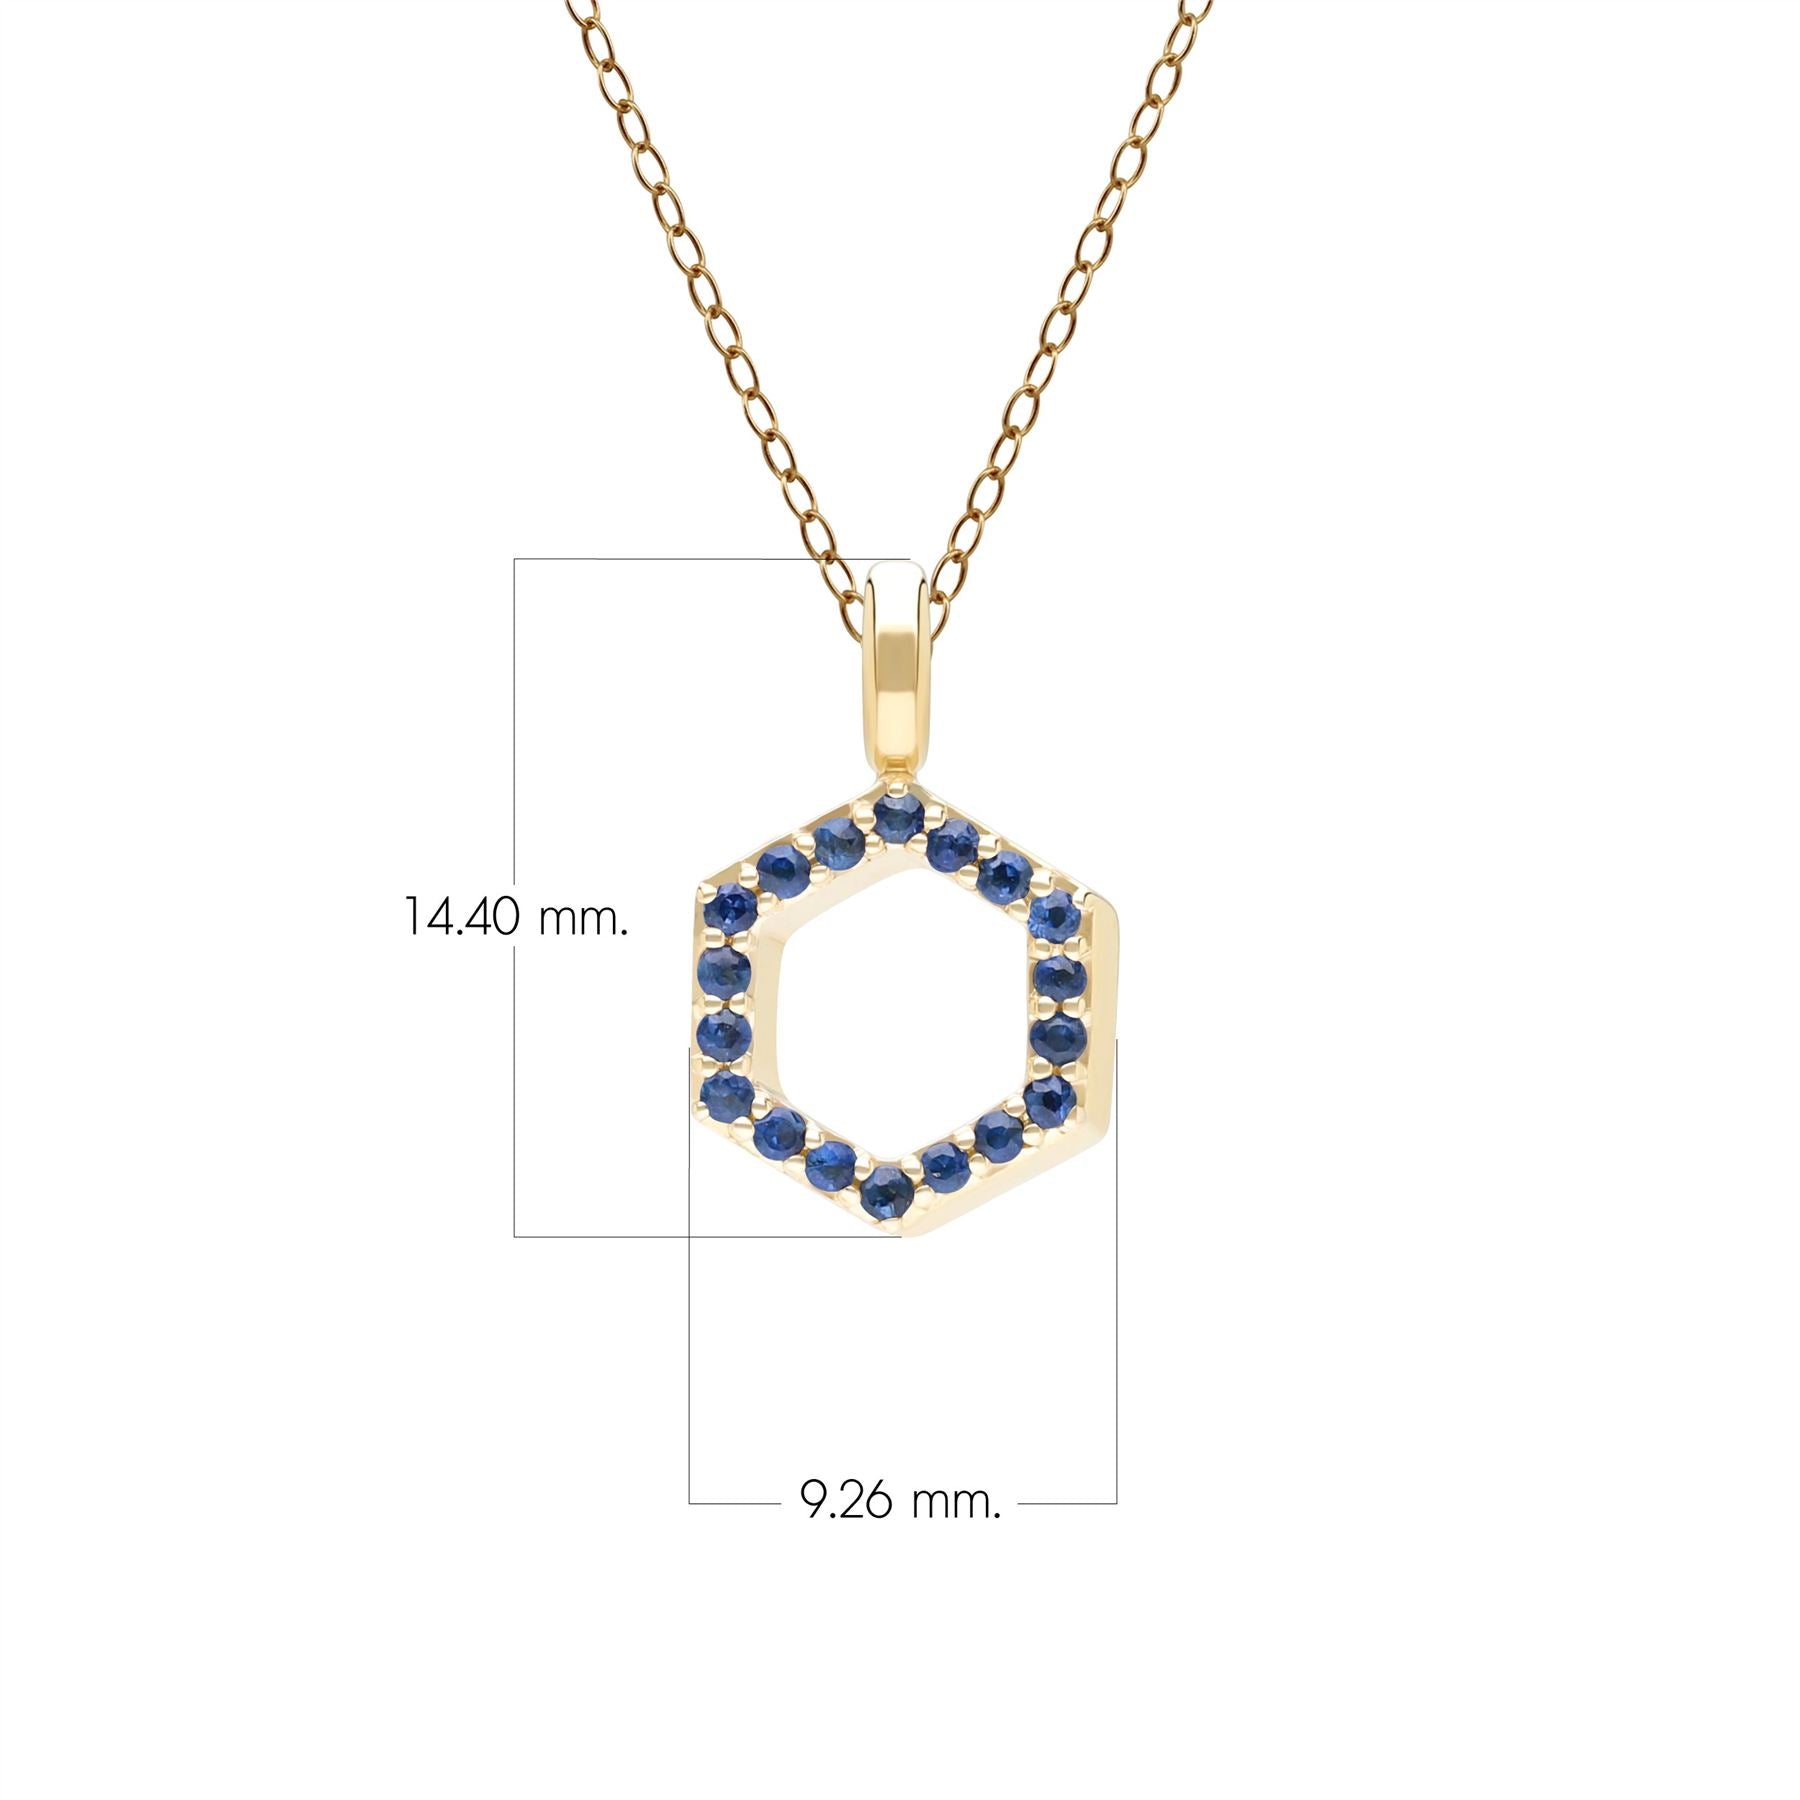 Geometric Hex Emerald Pendant Necklace in 9ct Yellow Gold Dimensions 